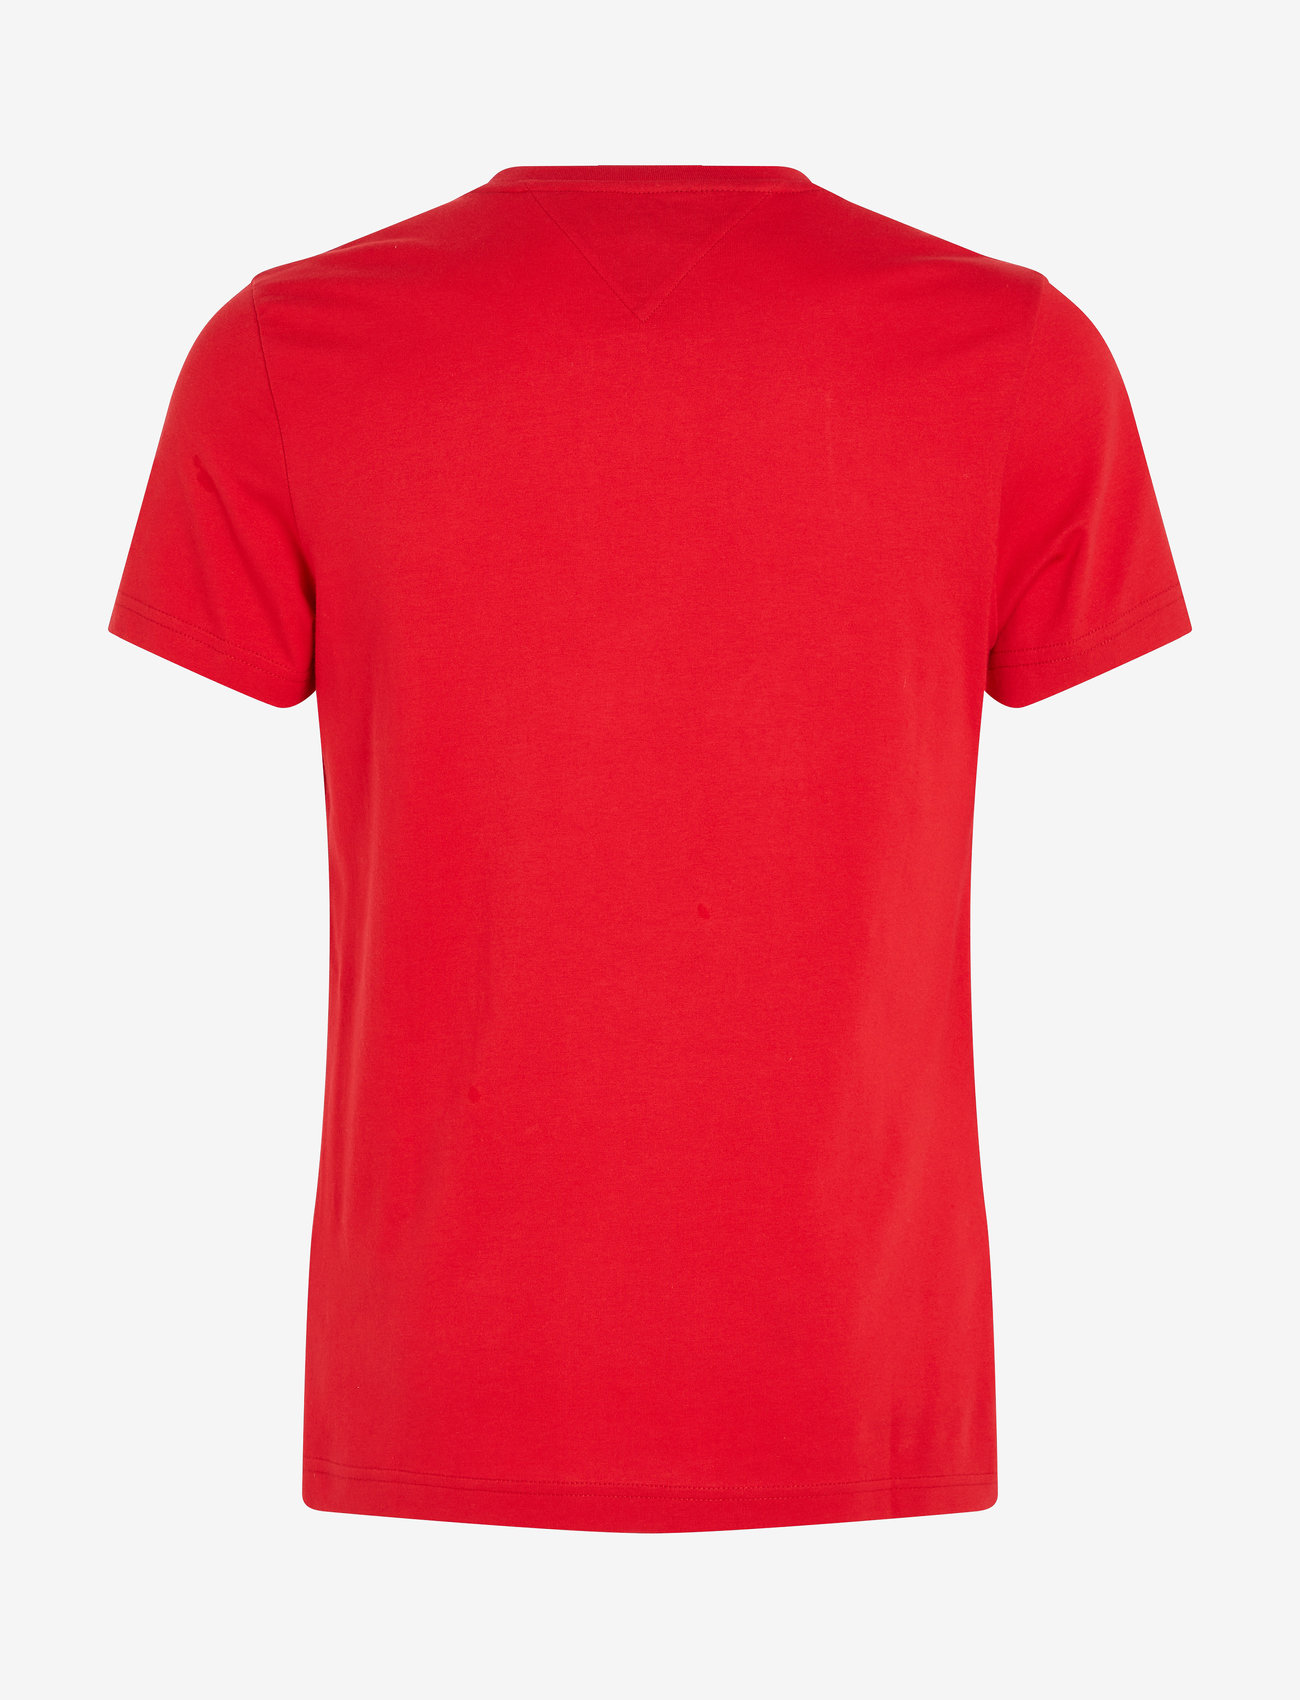 Tommy Hilfiger - TOMMY LOGO TEE - korte mouwen - primary red - 1